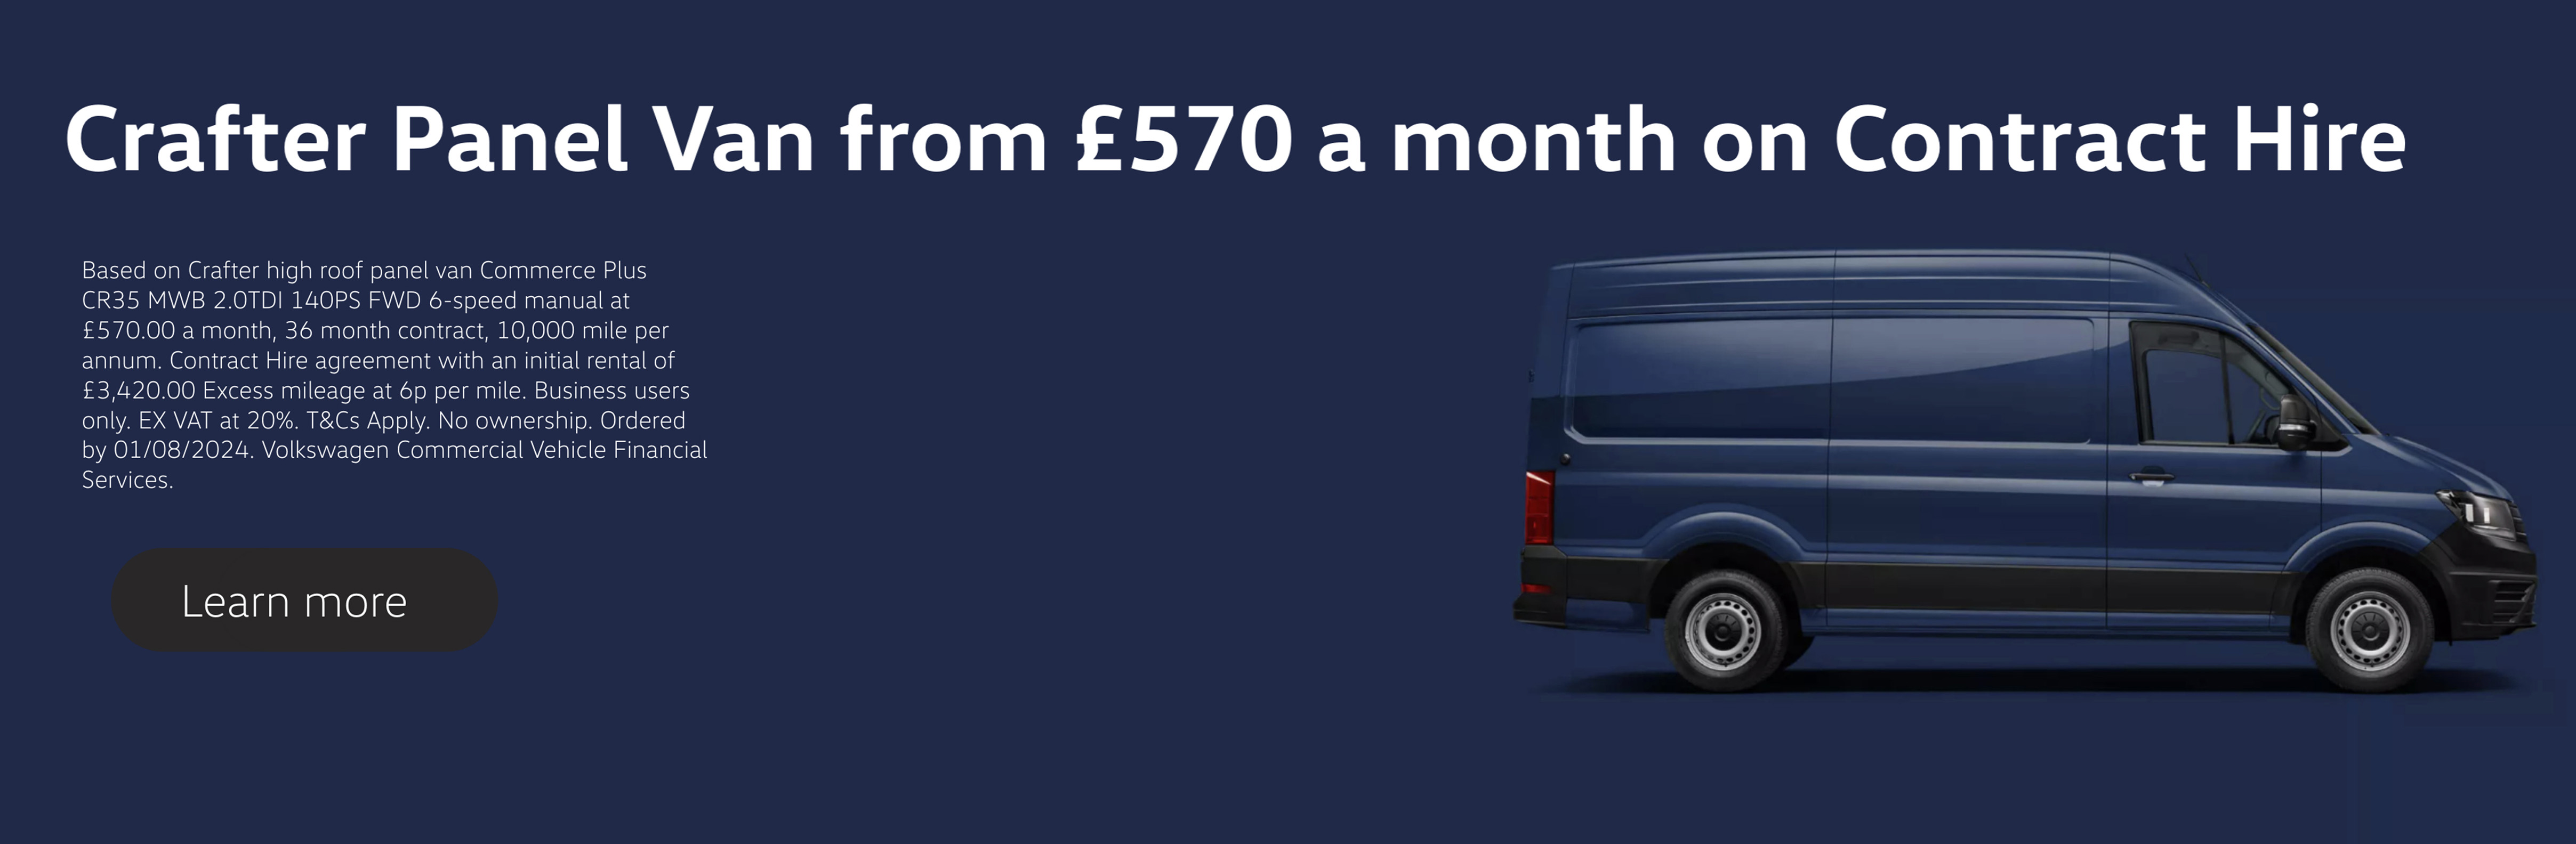 Crafter Offer £570